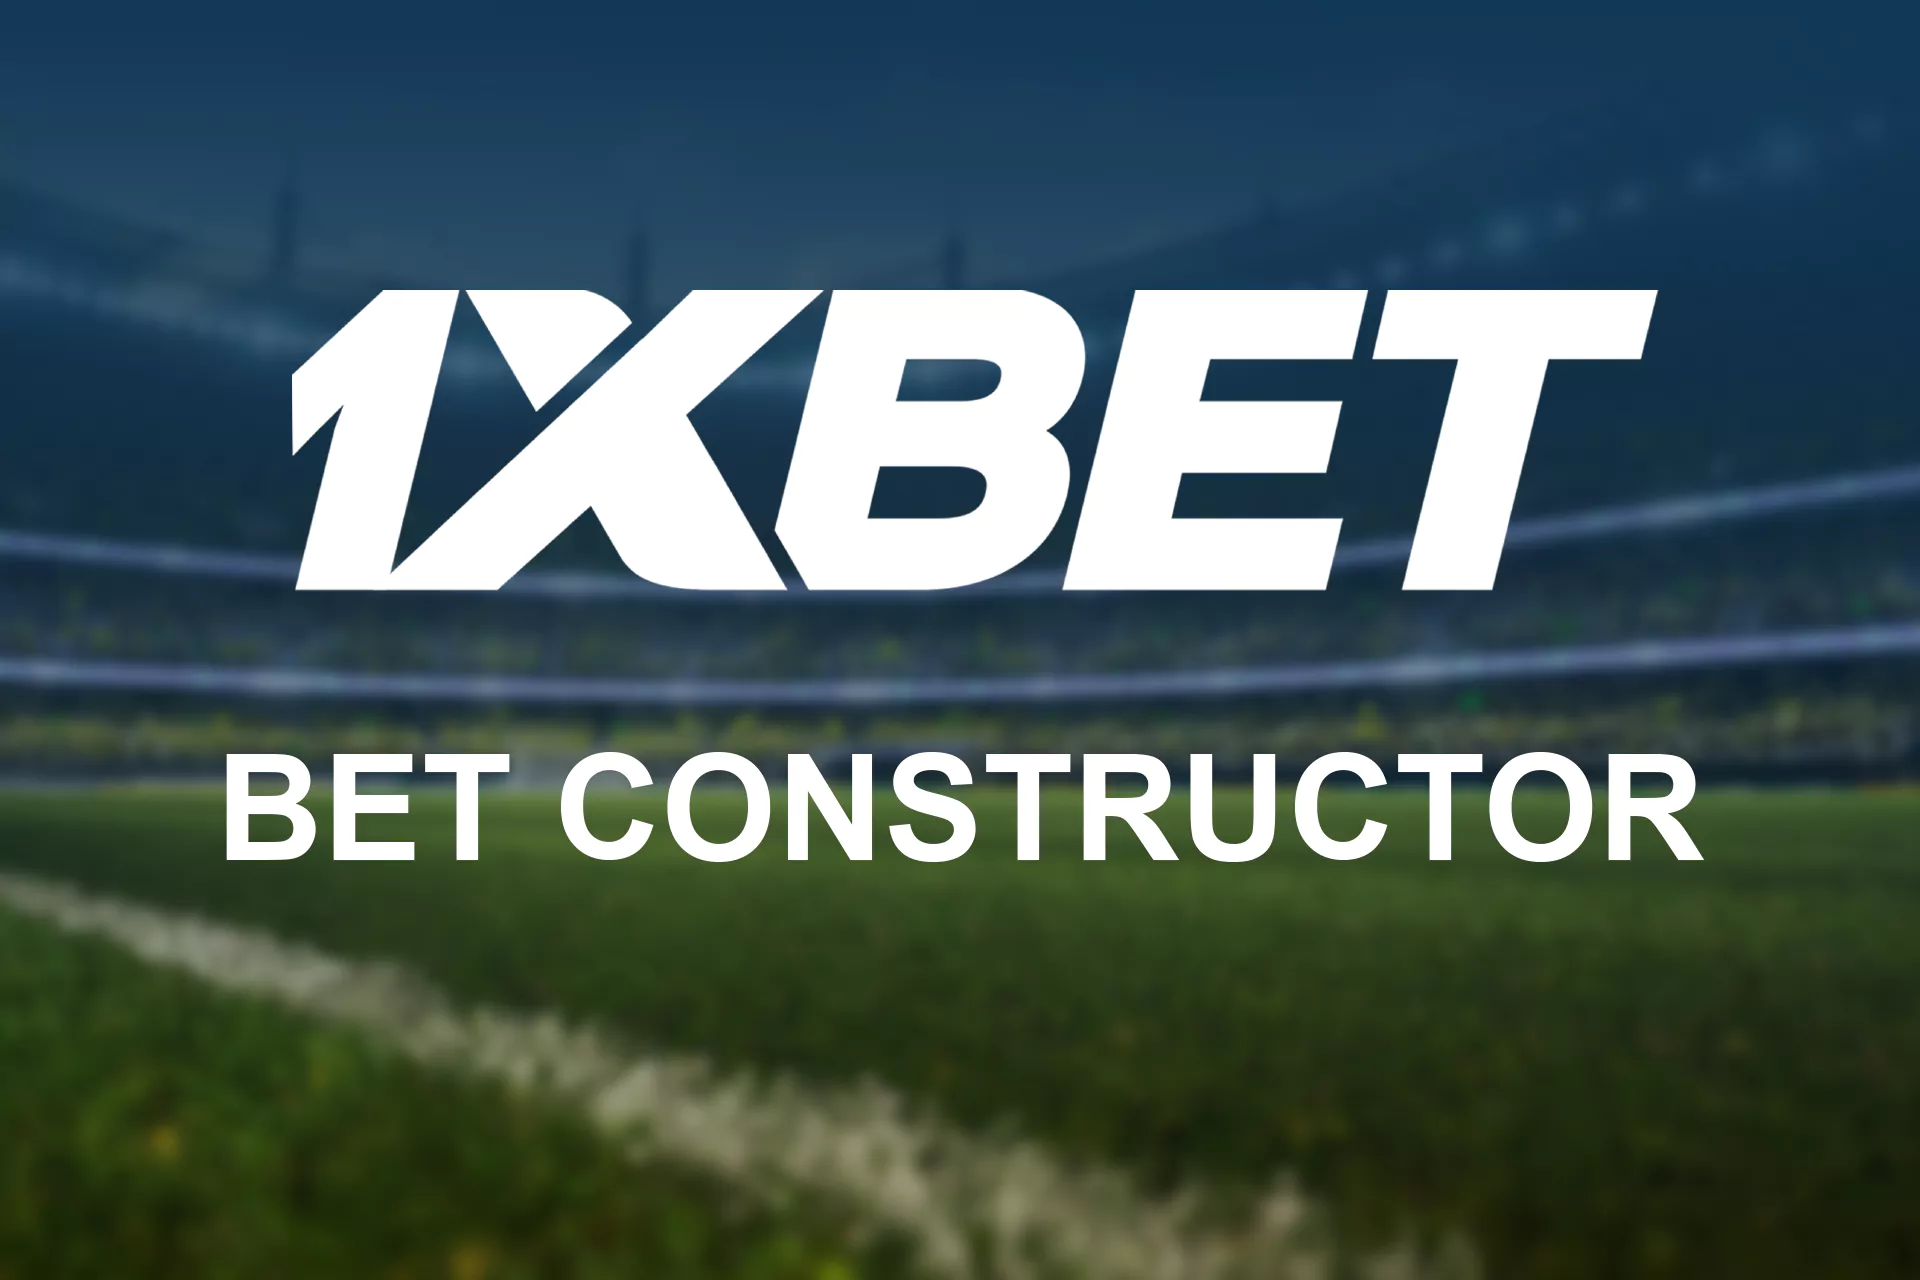 Create a unique bet in the 1xBet bet constructor.